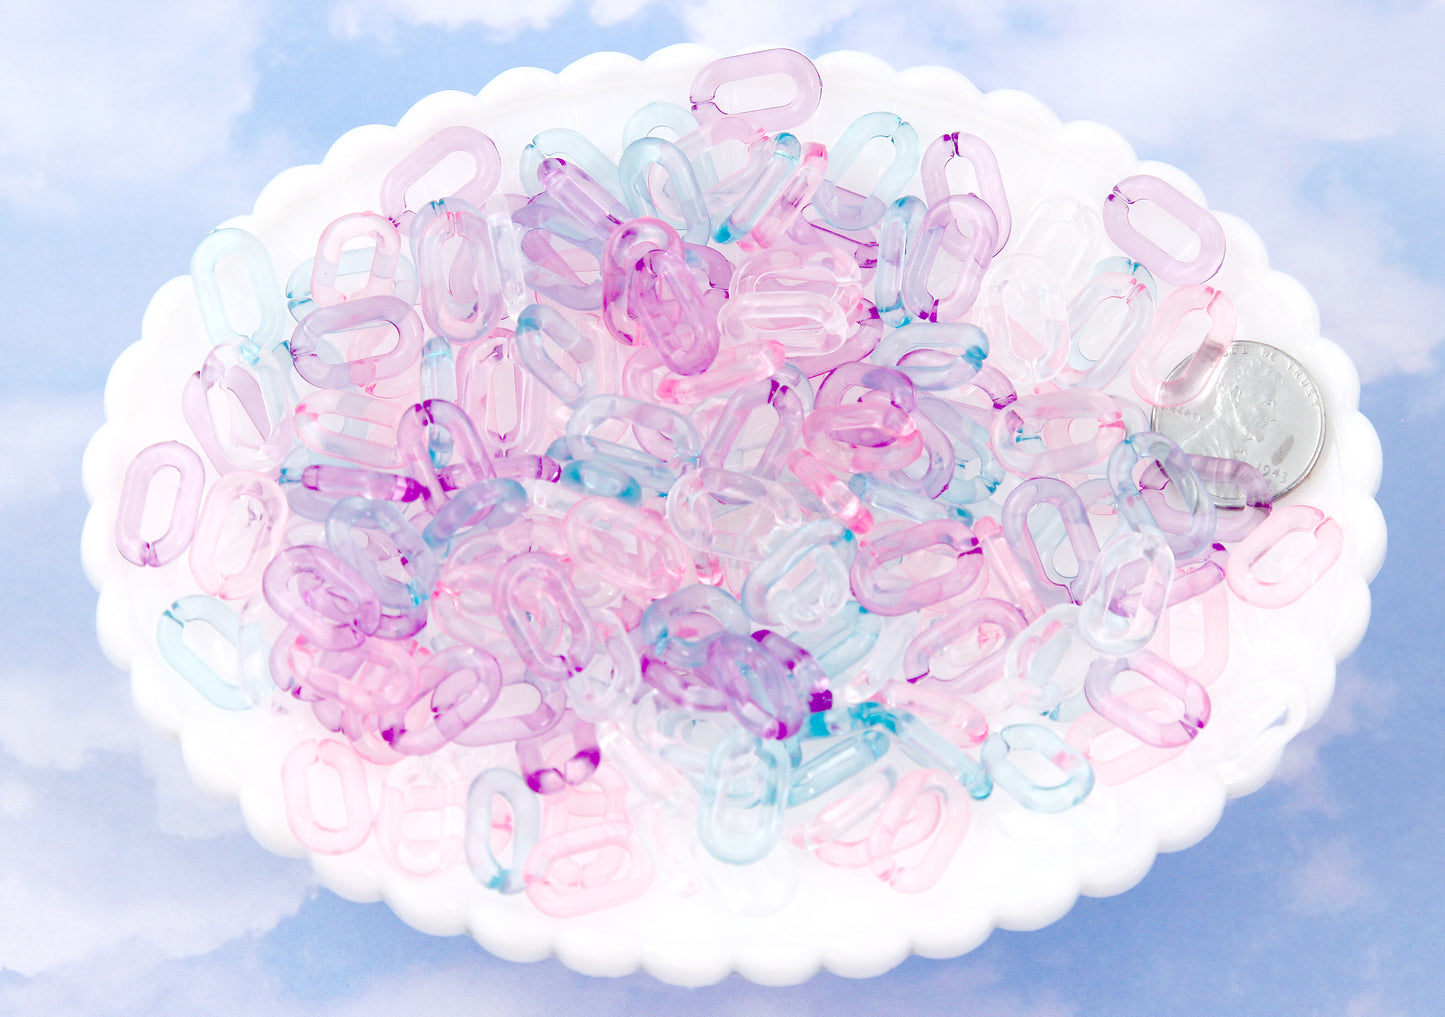 Pastel Plastic Chain Links - 15mm Pastel Transparent Colorful Plastic or Acrylic Chain Links - Mixed Colors - 200 pc set